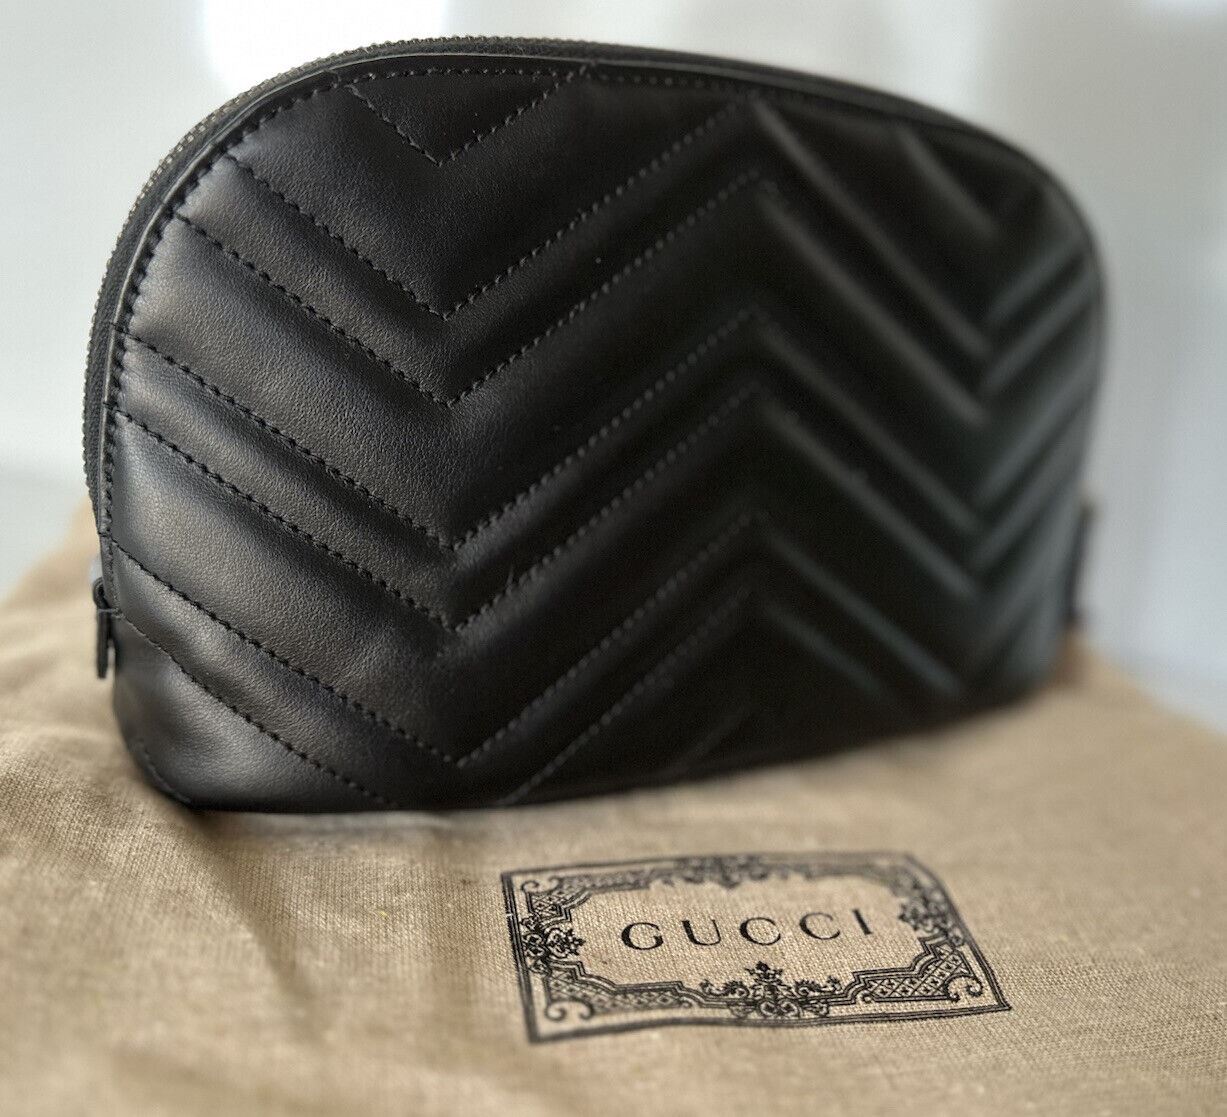 New Gucci GG Marmont Cosmetic Case Pouch Black Leather 625690 0416 IT